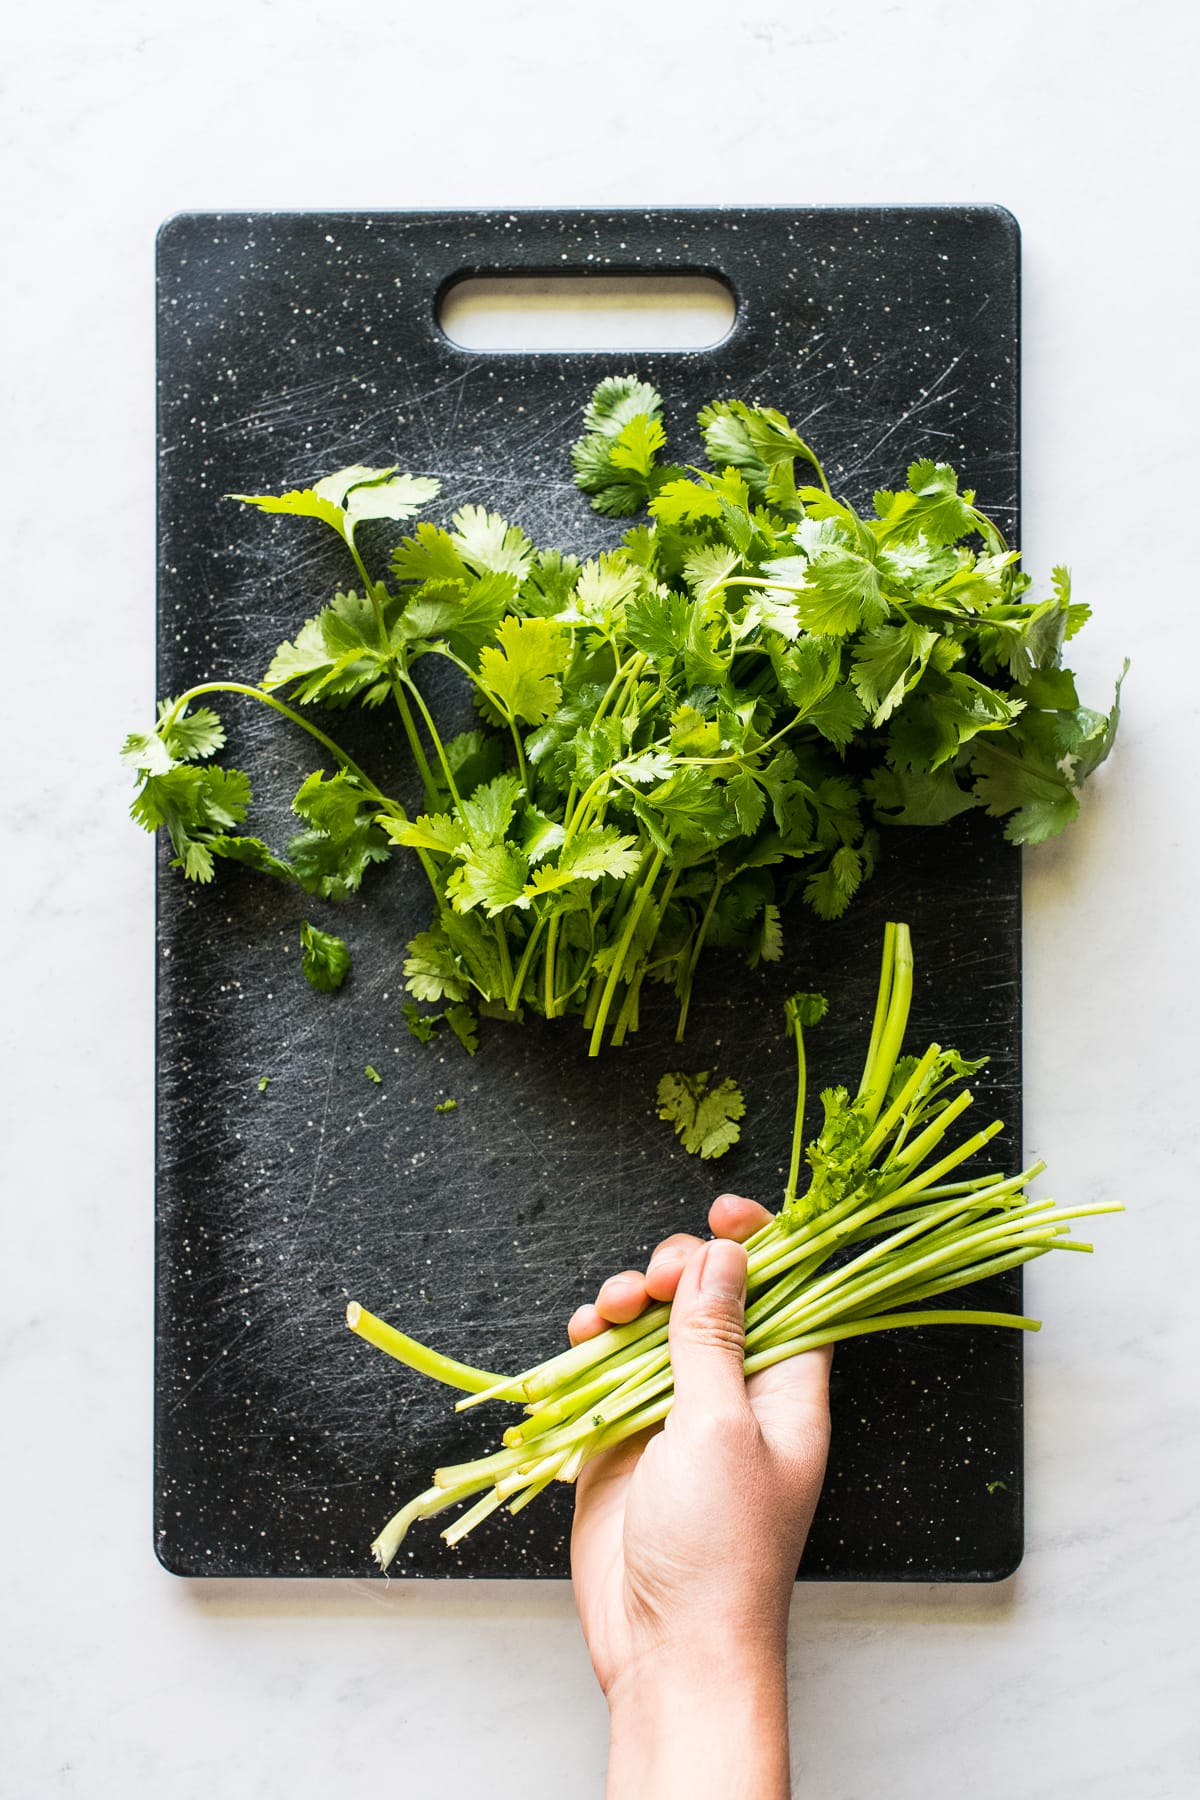 https://www.isabeleats.com/wp-content/uploads/2020/05/how-to-chop-cilantro-small-2.jpg